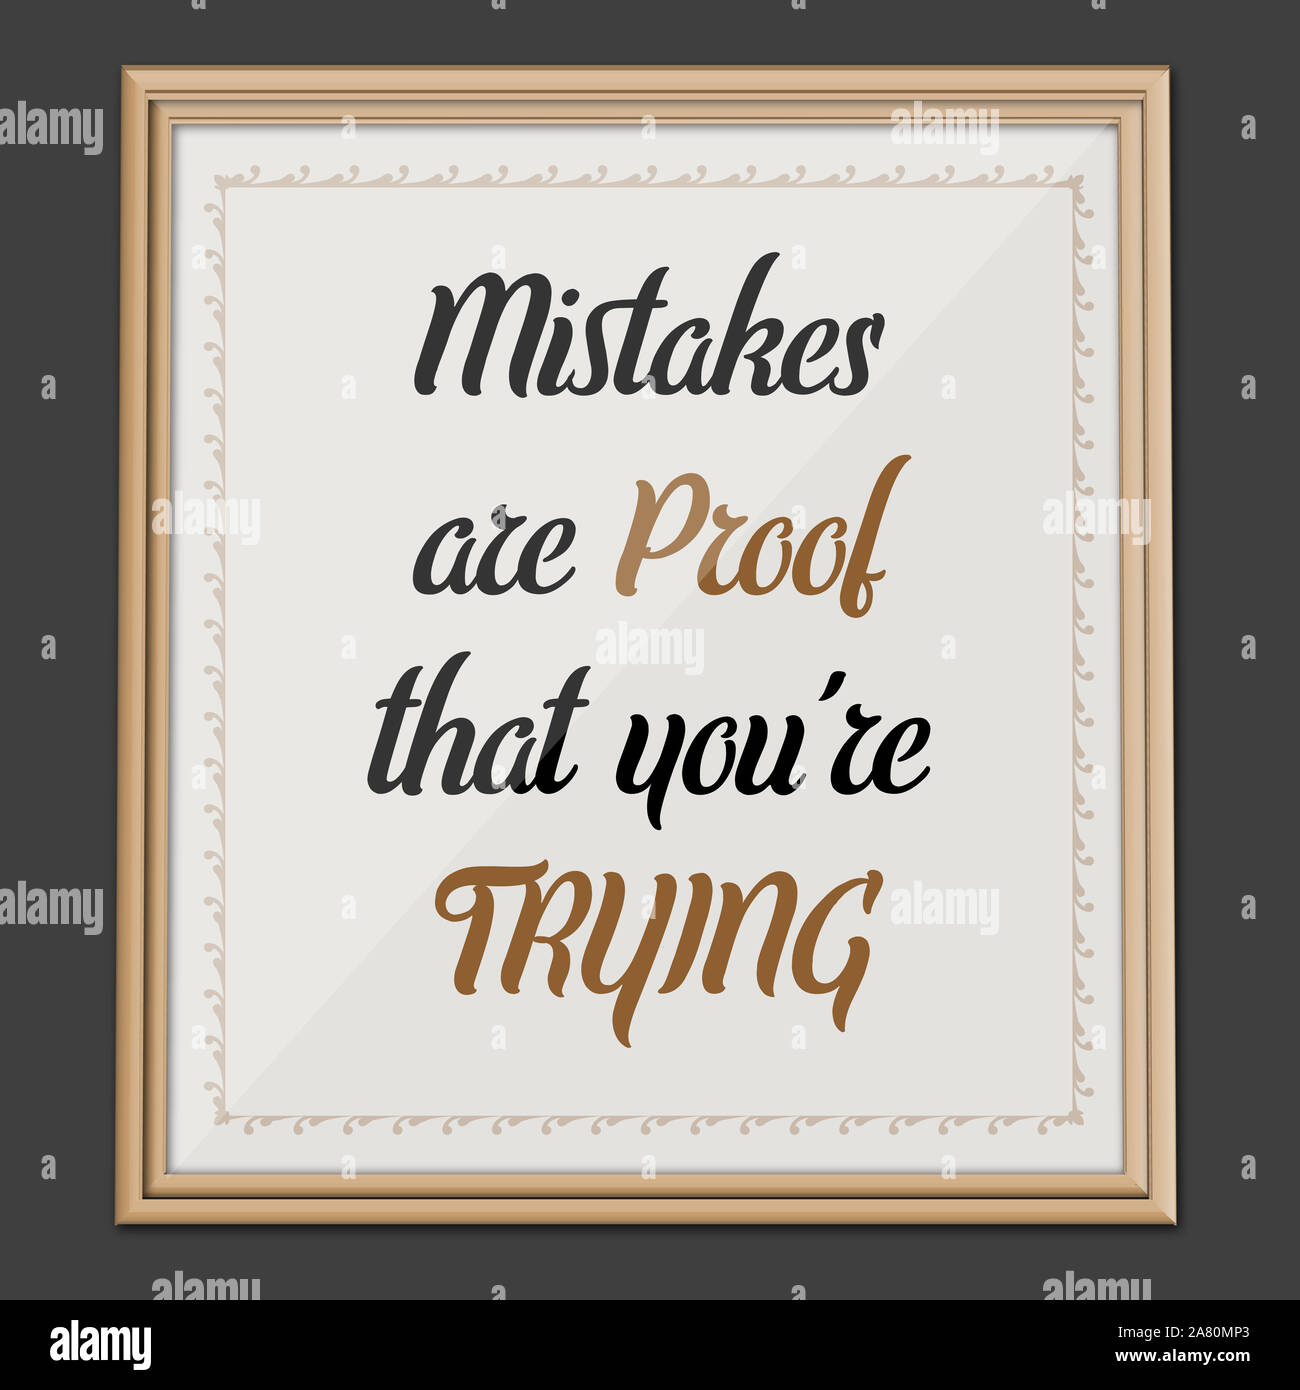 Mistakes are Proof that you are Trying. Motivation and Inspirational Quote Wall art Poster Stock Photo